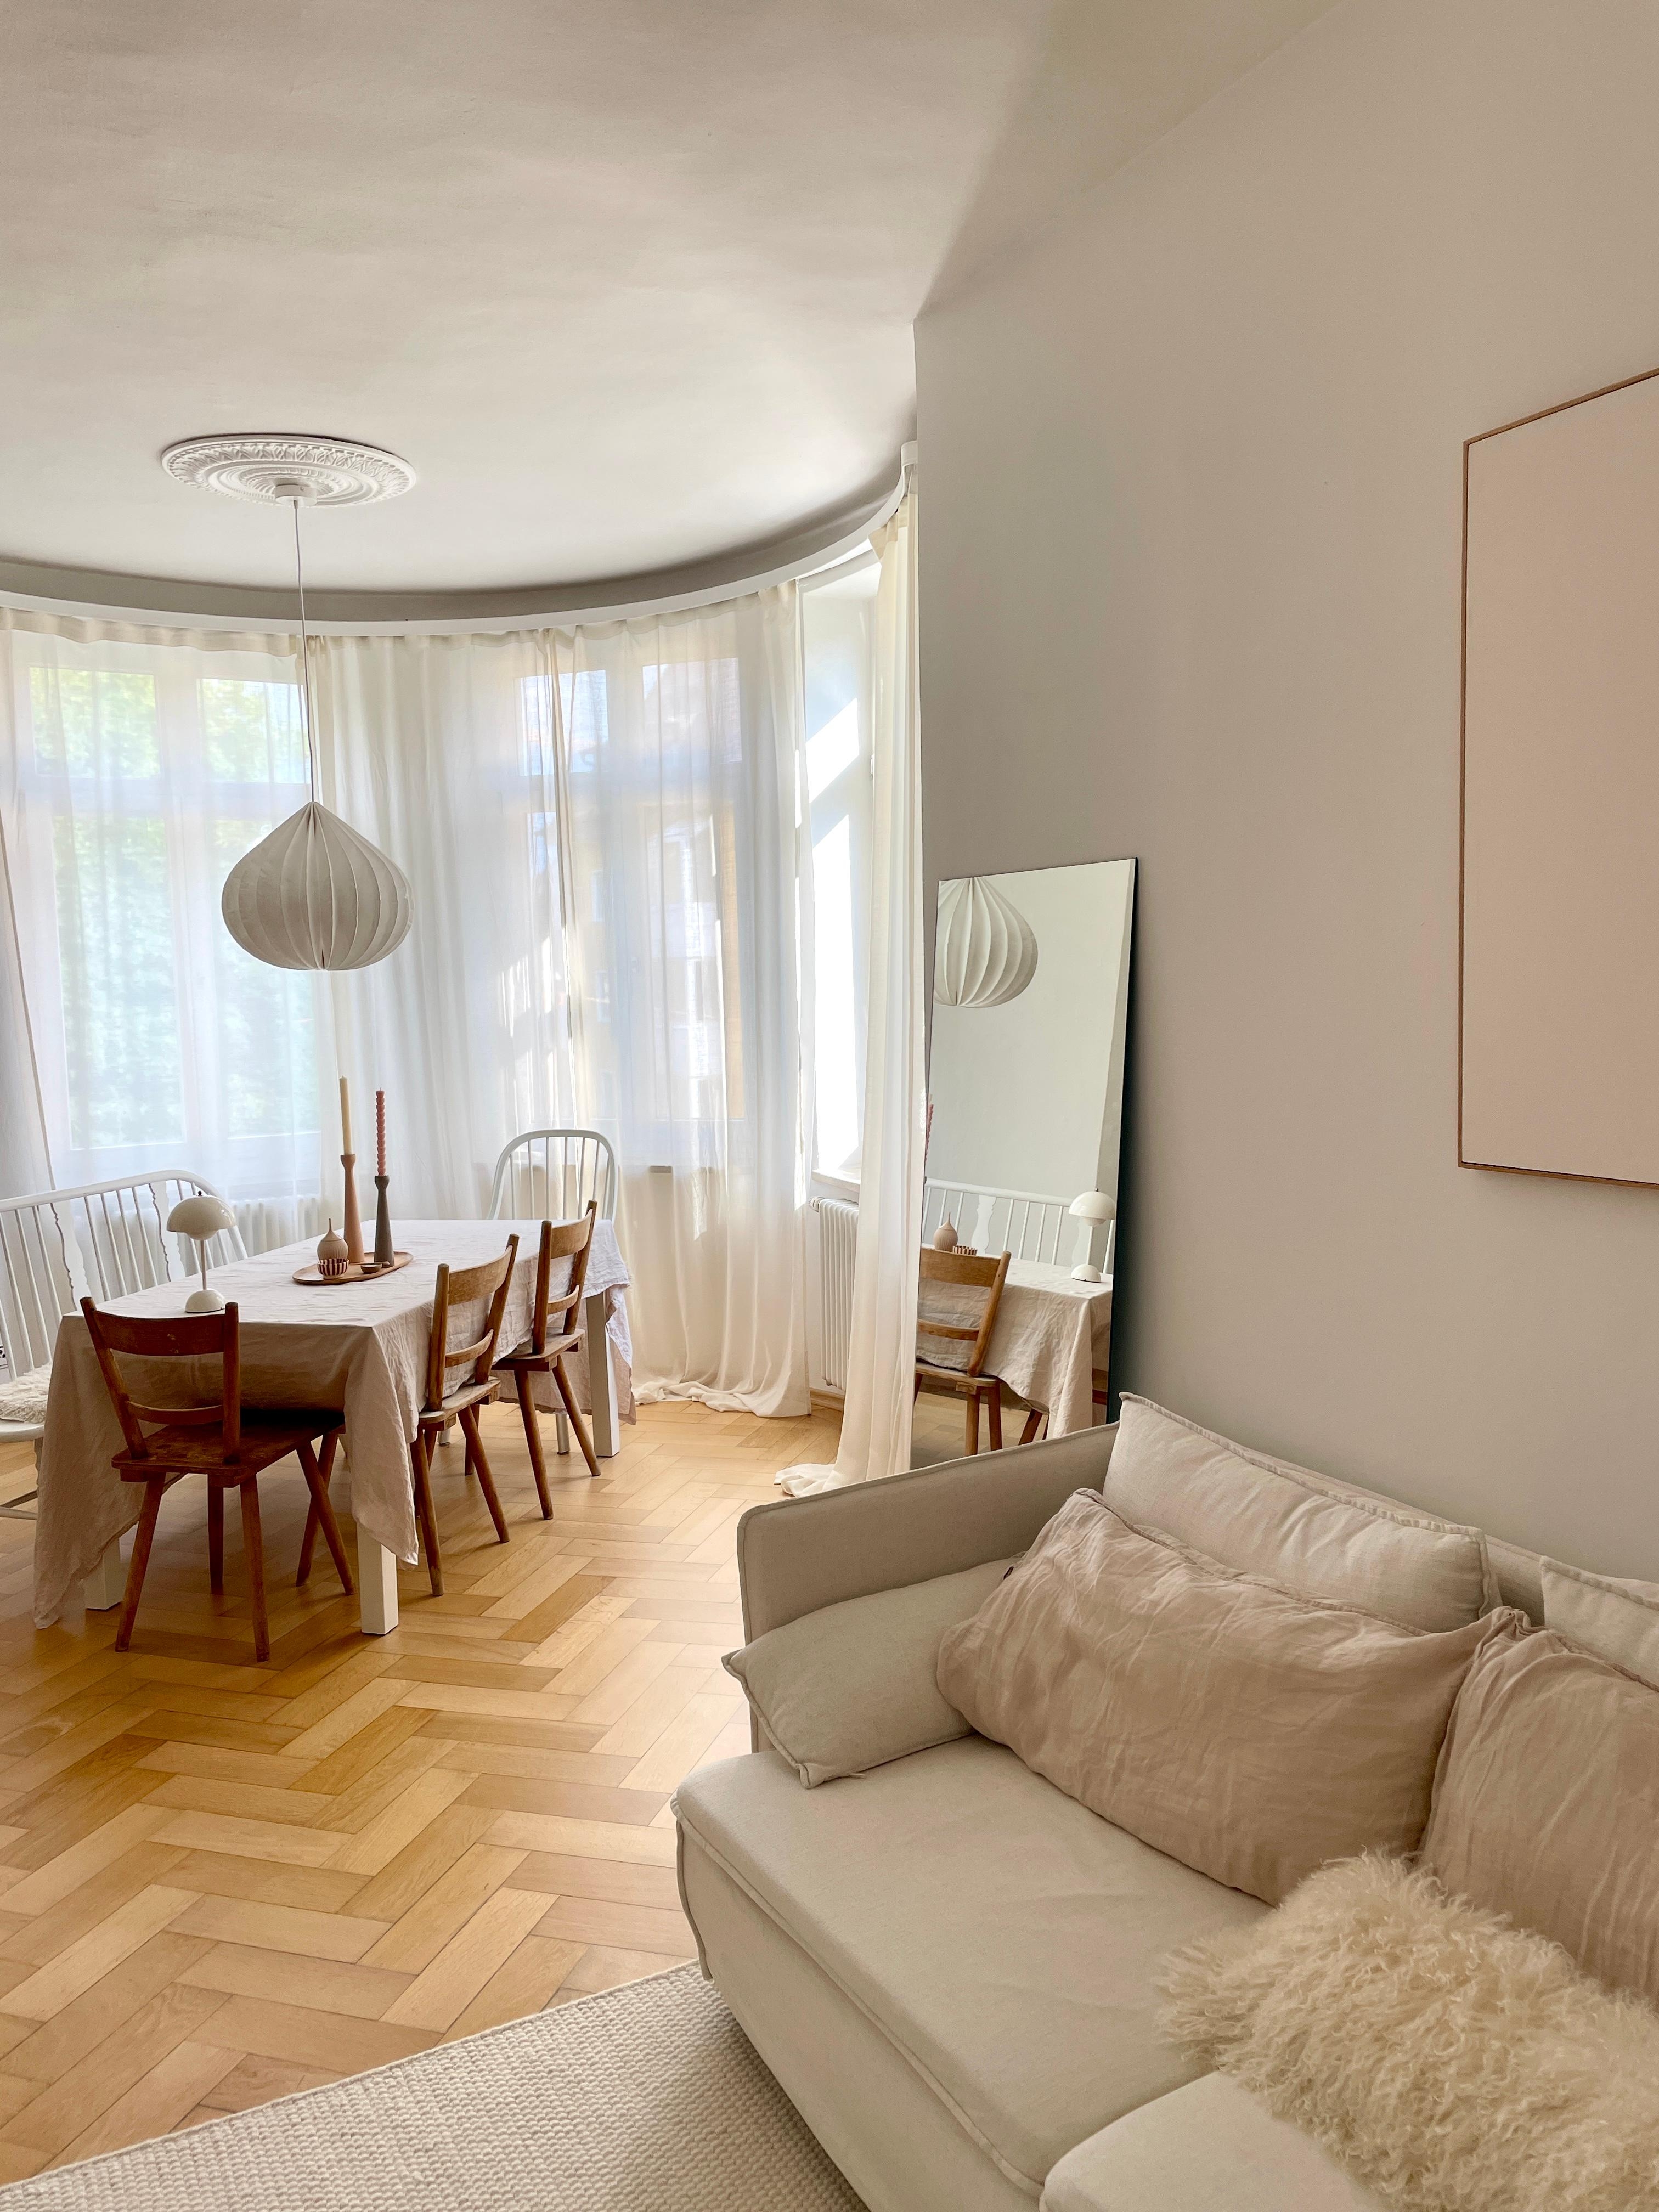 Our new home #zuhause #interior #naturalcolors #wohnzimmer